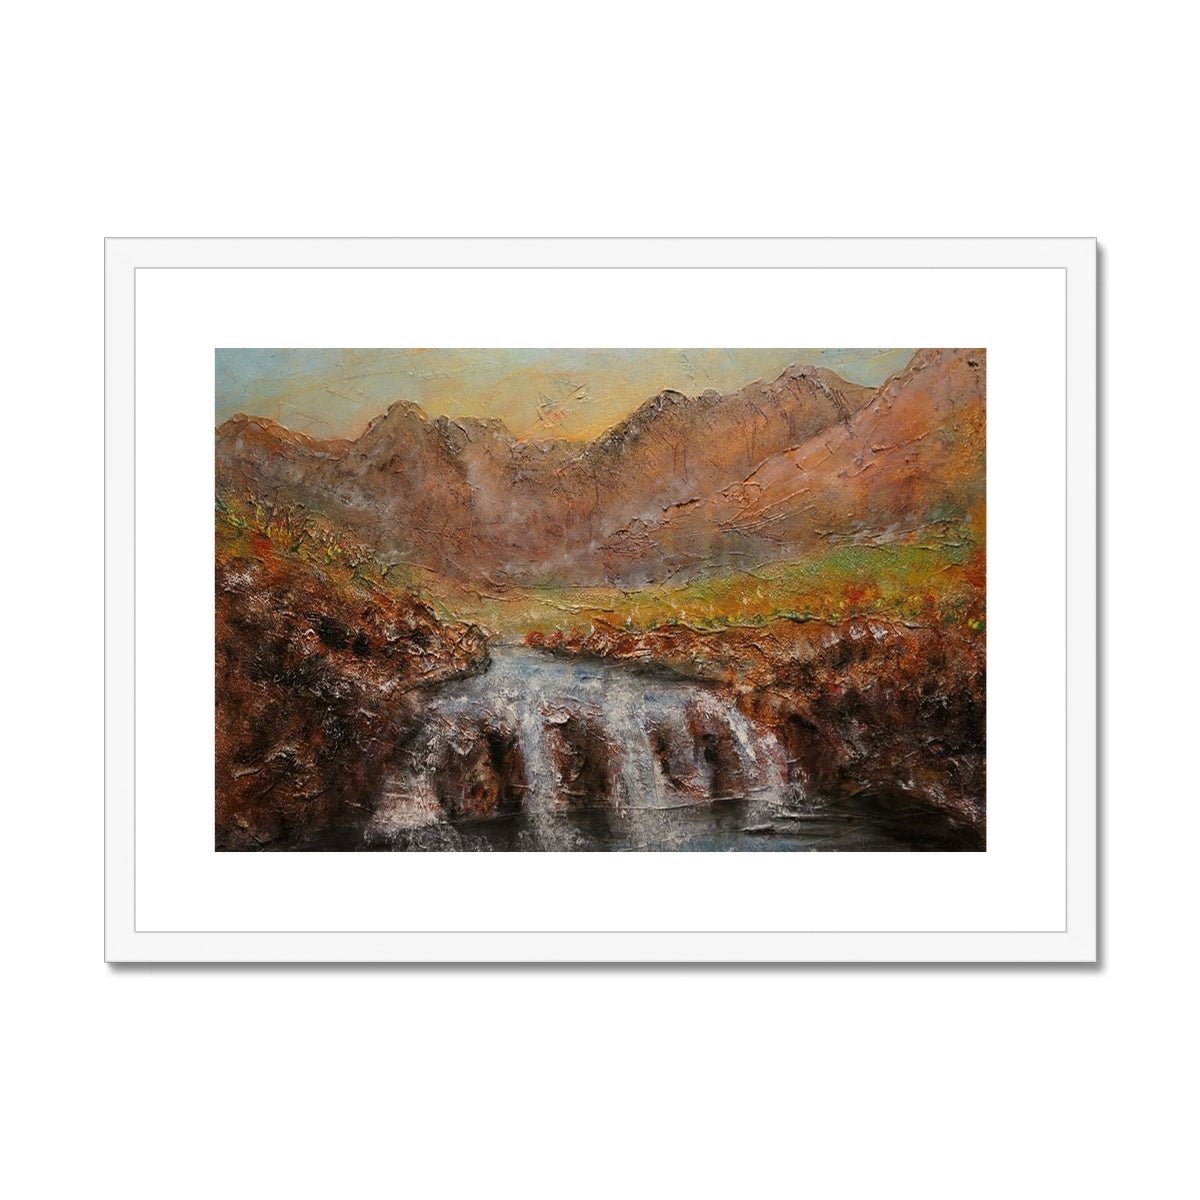 Fairy Pools Dawn Skye Painting | Framed & Mounted Prints From Scotland-Framed & Mounted Prints-Skye Art Gallery-A2 Landscape-White Frame-Paintings, Prints, Homeware, Art Gifts From Scotland By Scottish Artist Kevin Hunter